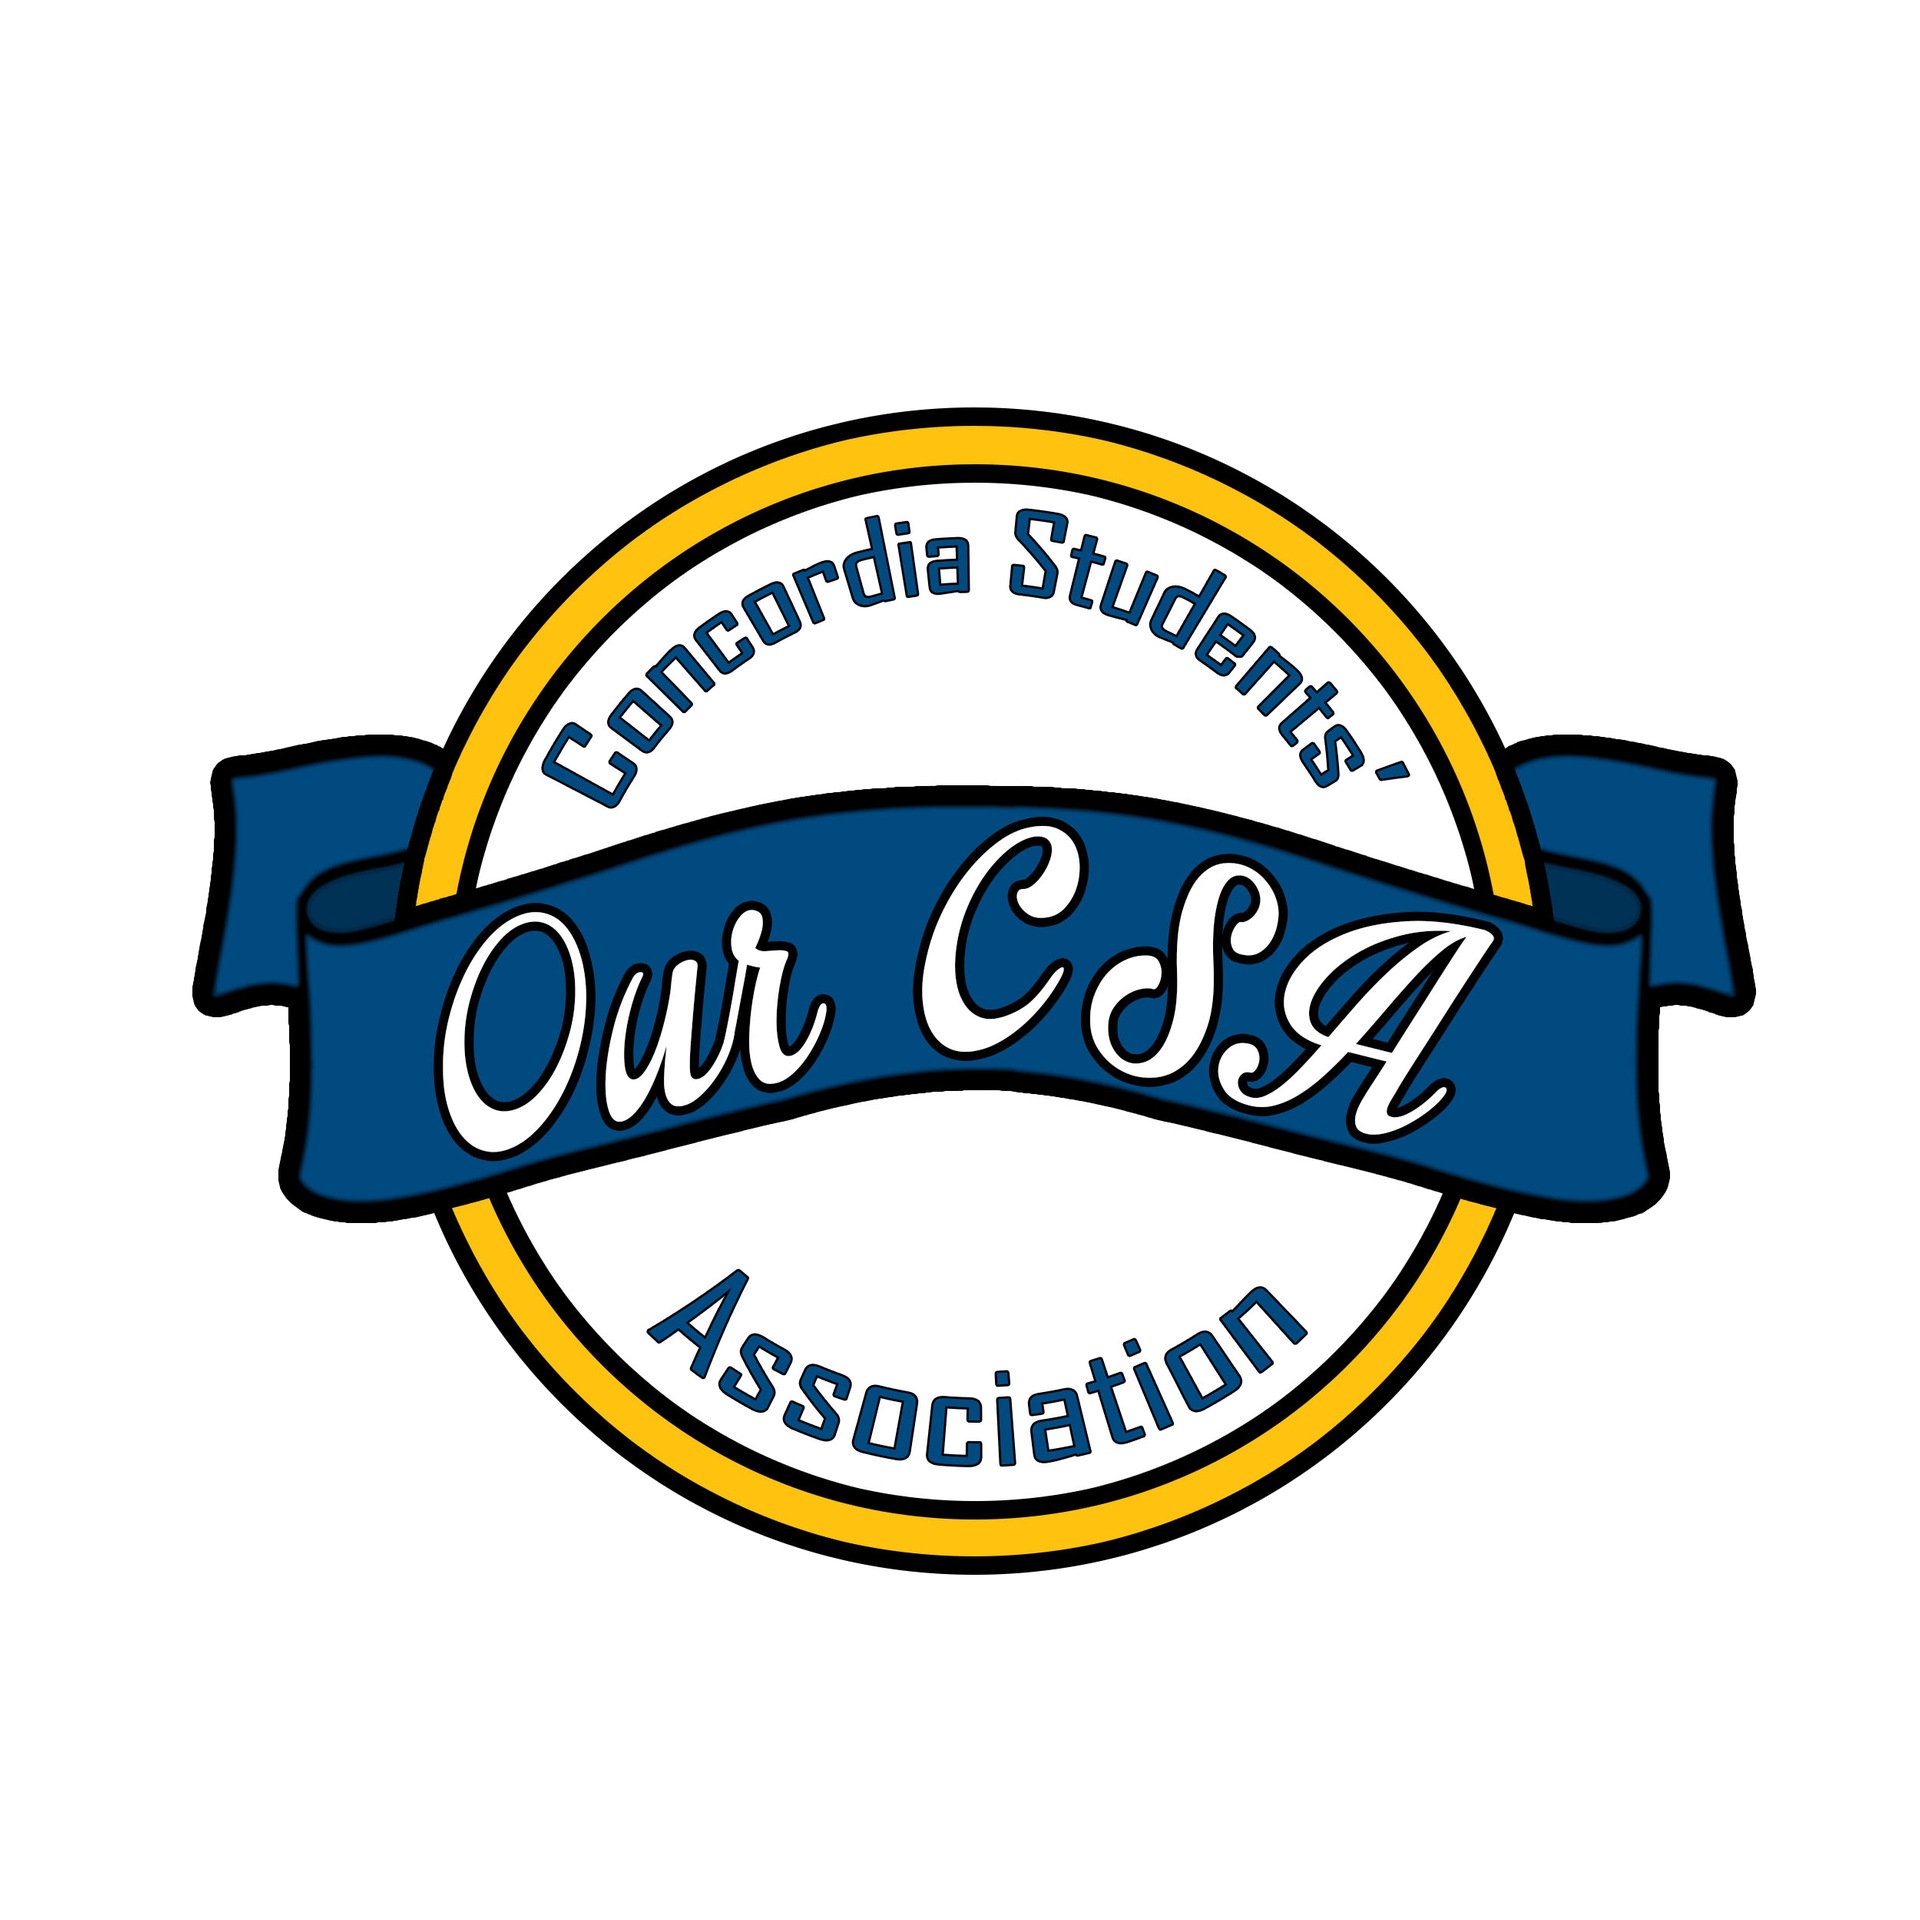 https://www.ourcsa.ca/